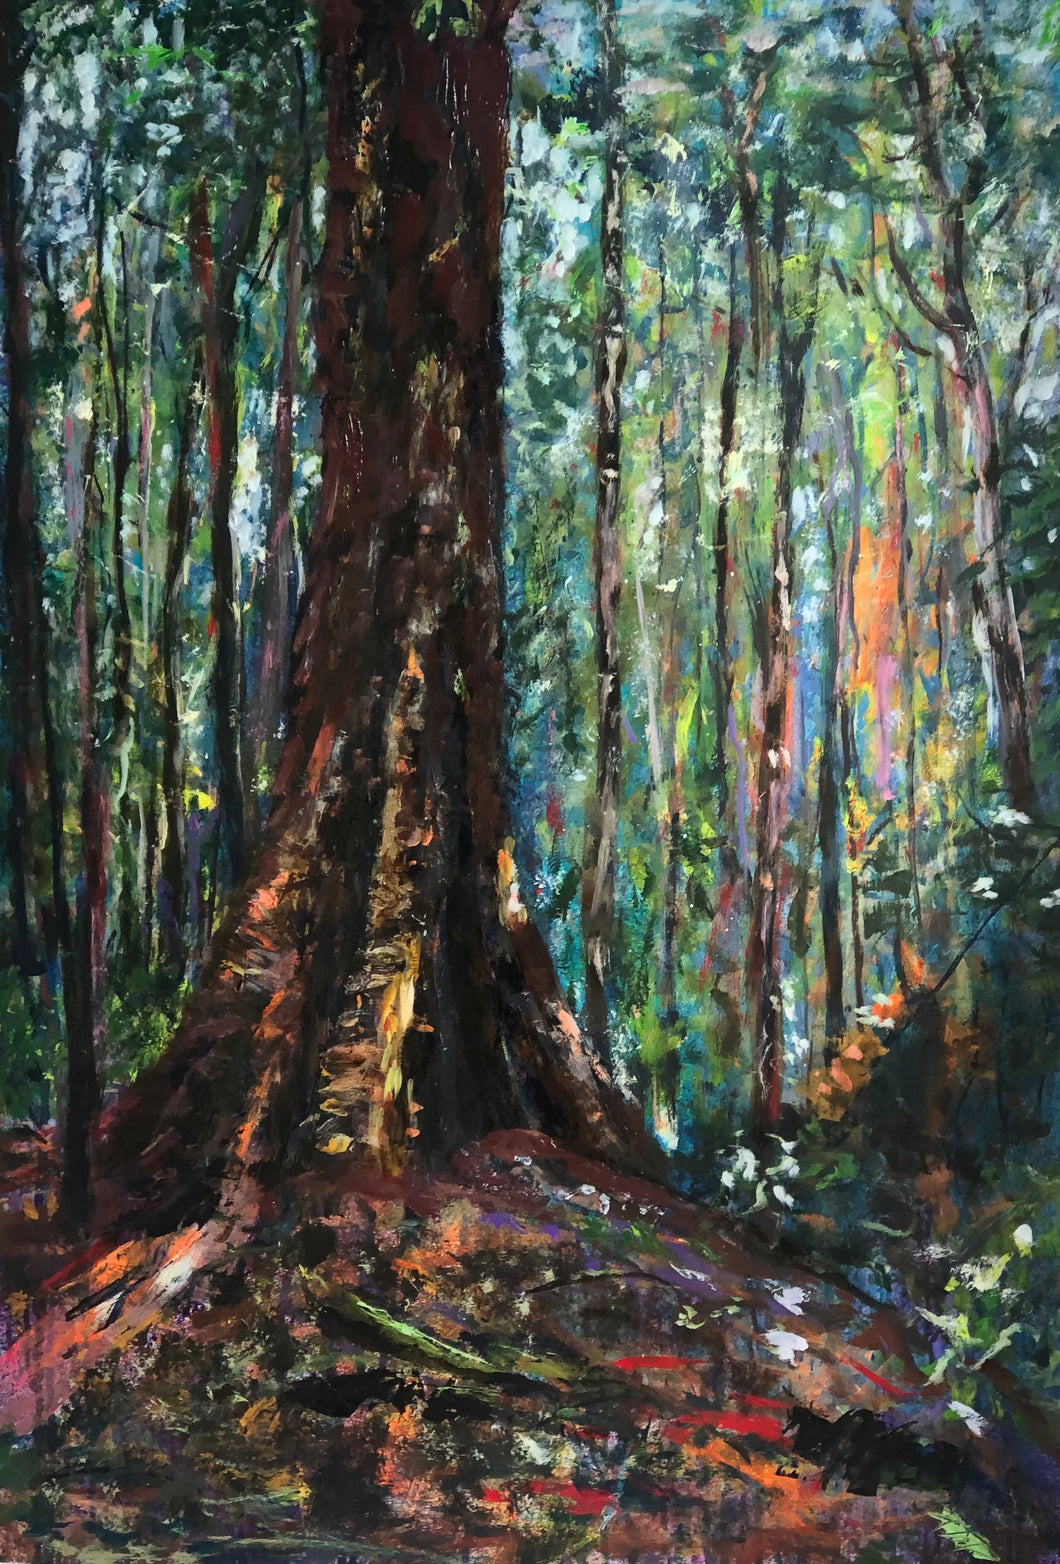 Acrylic and oil painting of giant tree in rainforest, Australian landscape, light peeking through the trees